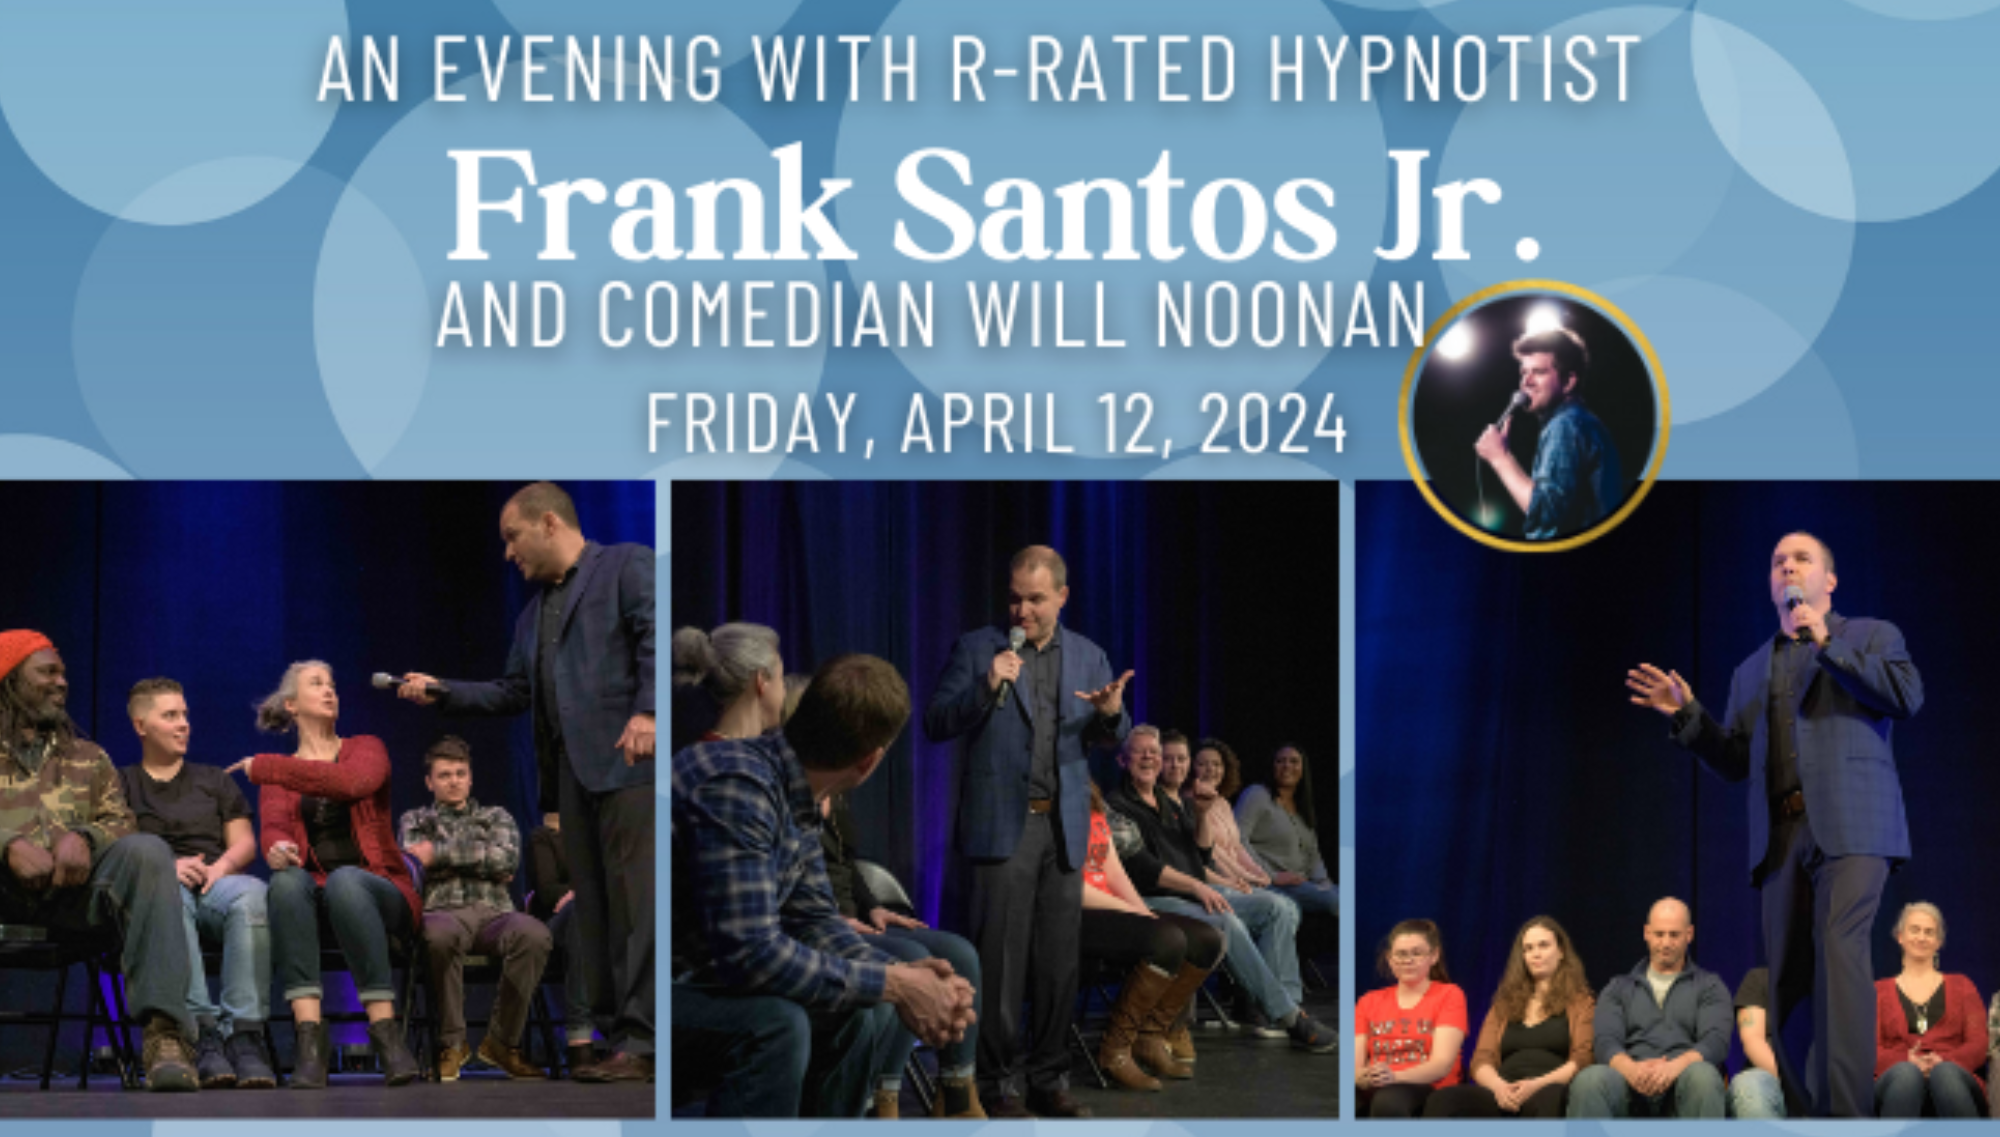 92 PROFM PRESENTS R-RATED COMIC/HYPNOTIST FRANK SANTOS JR.  <h5>with comic Will Noonan</h5>  <h5>April 12, 2024</h5>